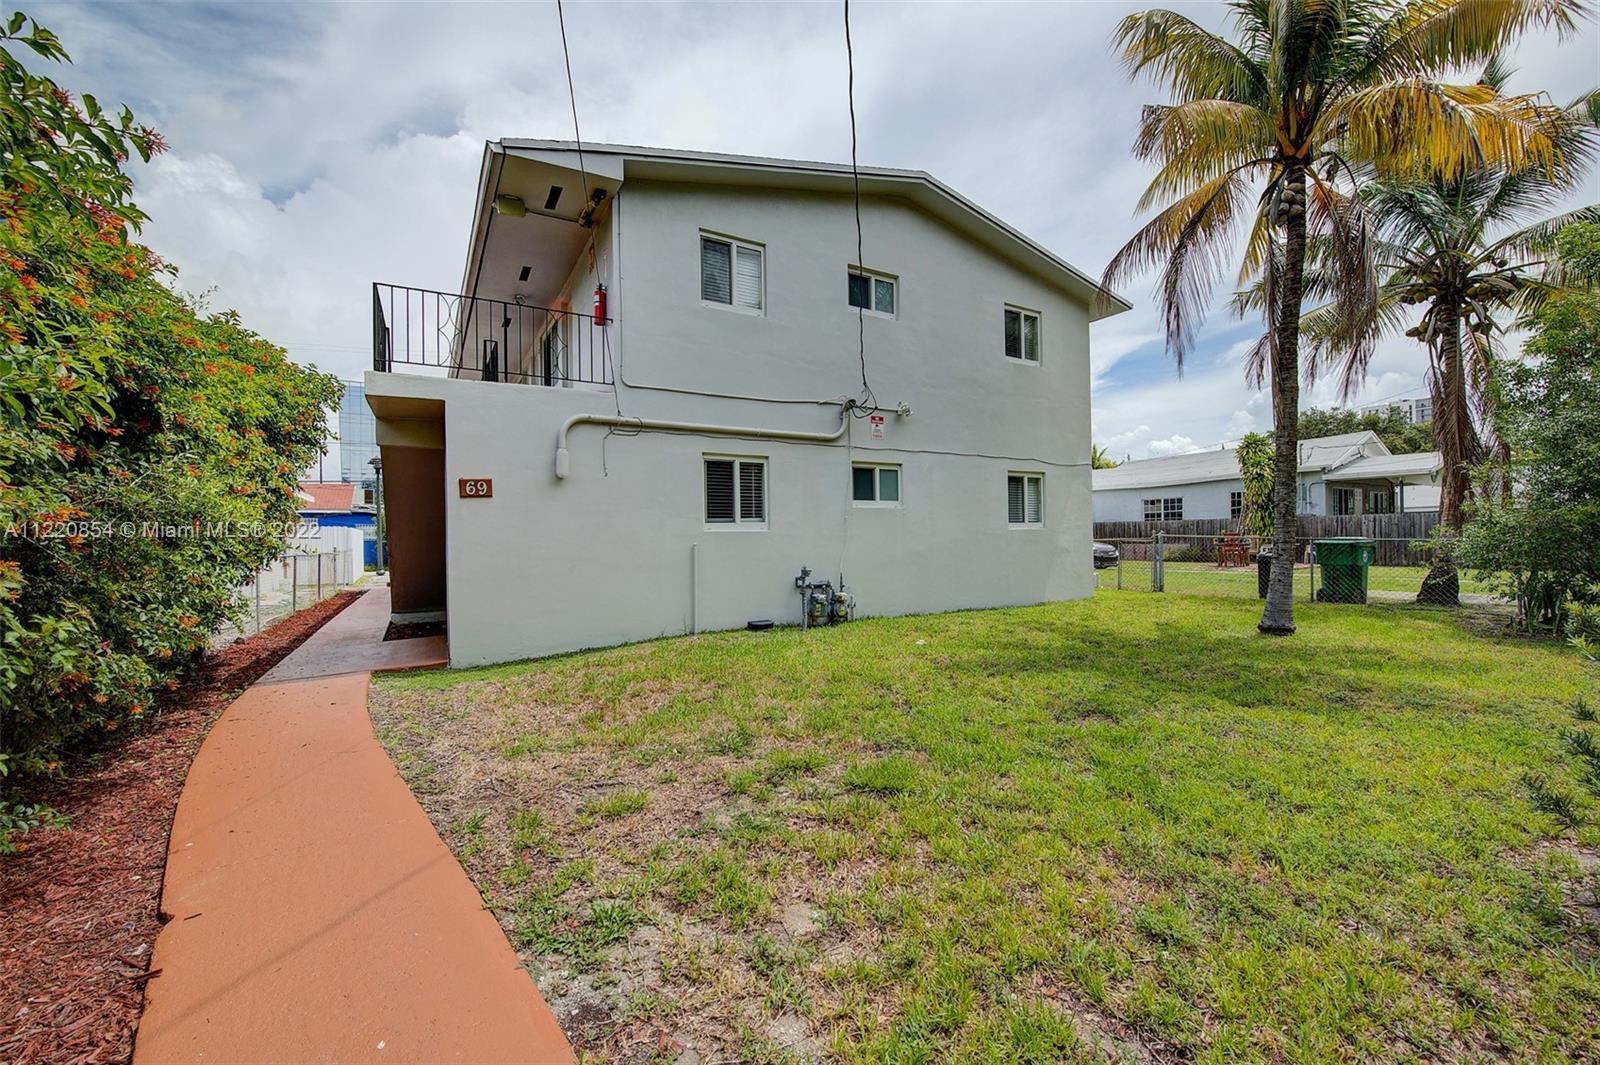 Photo of 69 NW 35th St in Miami, FL